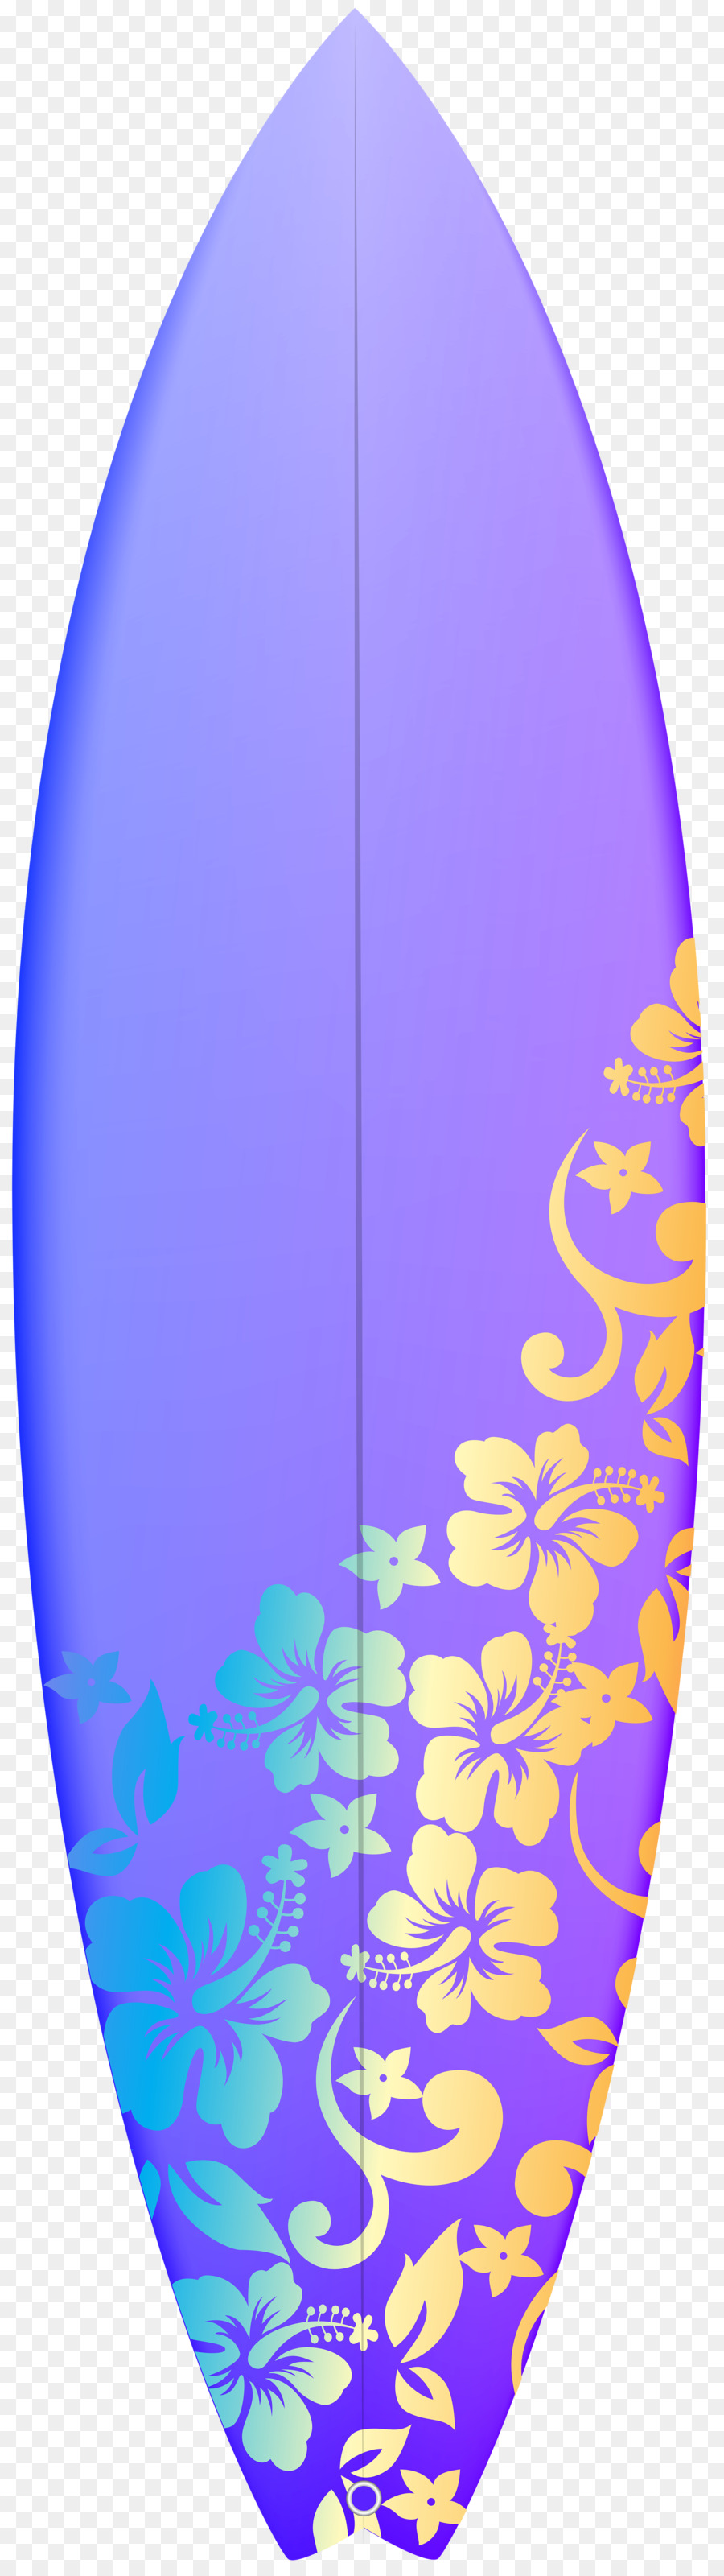 Clip art Surfboard Surfing Portable Network Graphics Transparency - surfing png download - 2257*8000 - Free Transparent Surfboard png Download.